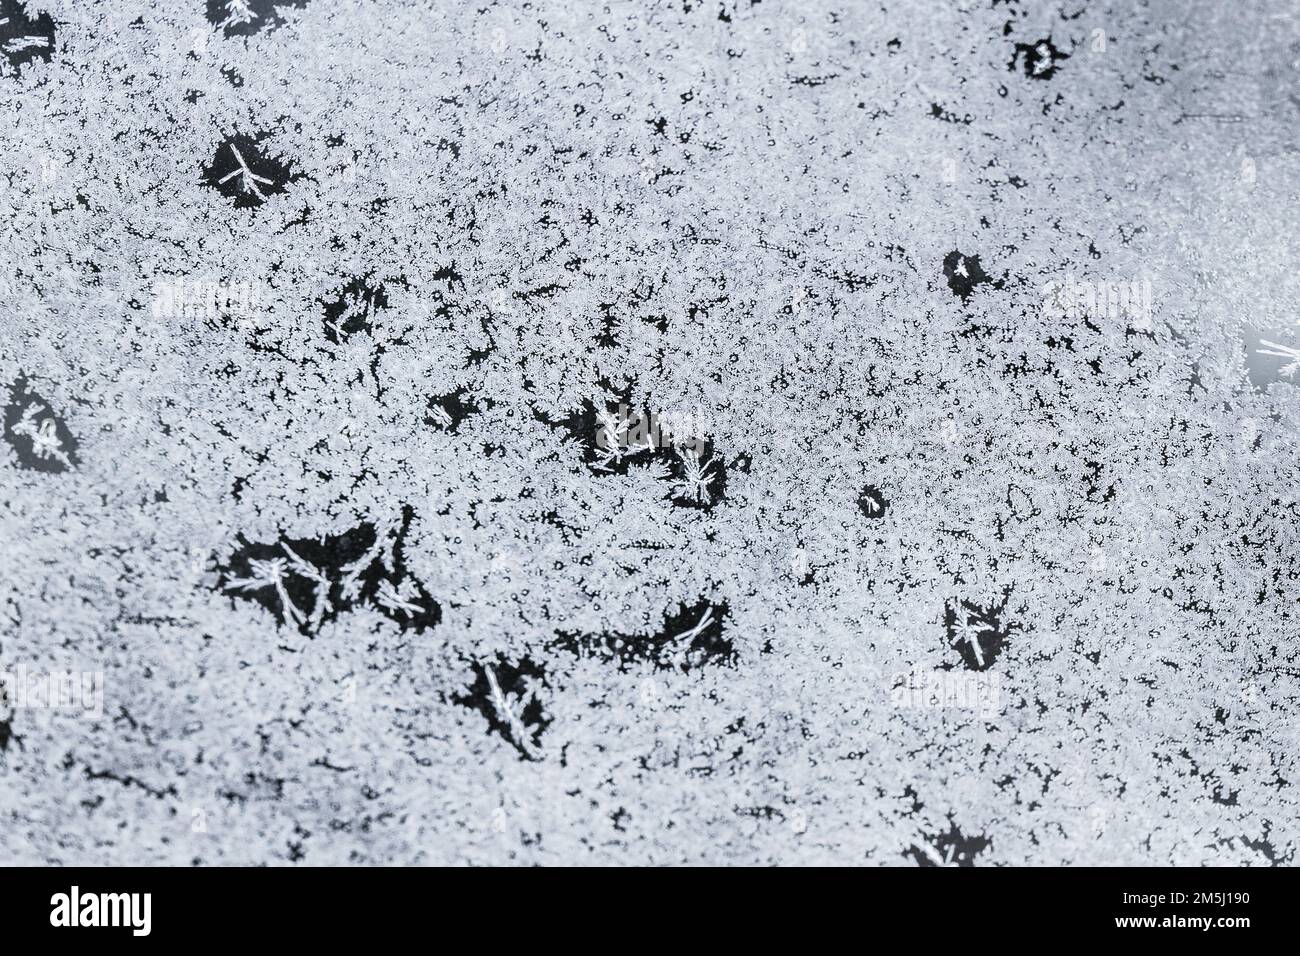 https://c8.alamy.com/comp/2M5J190/frost-and-ice-crystals-are-on-the-window-glass-abstract-background-texture-2M5J190.jpg